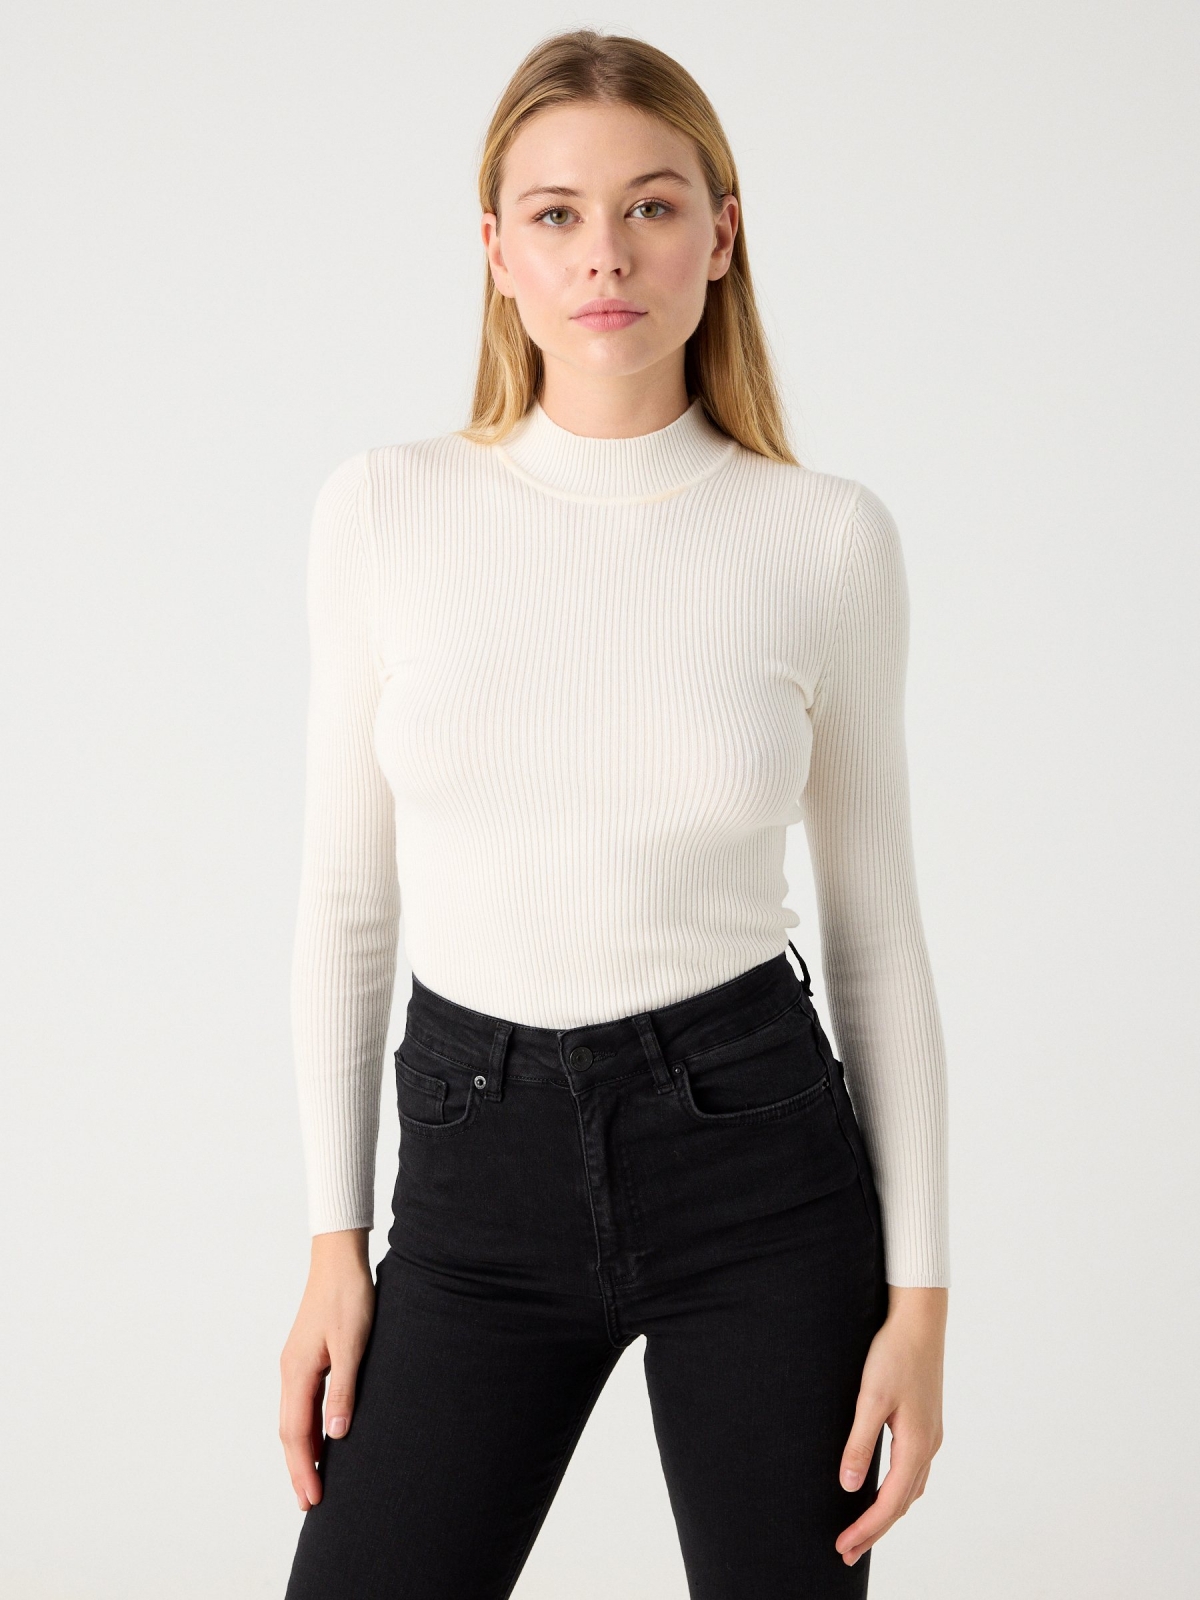 Black sweater with turtleneck off white middle front view